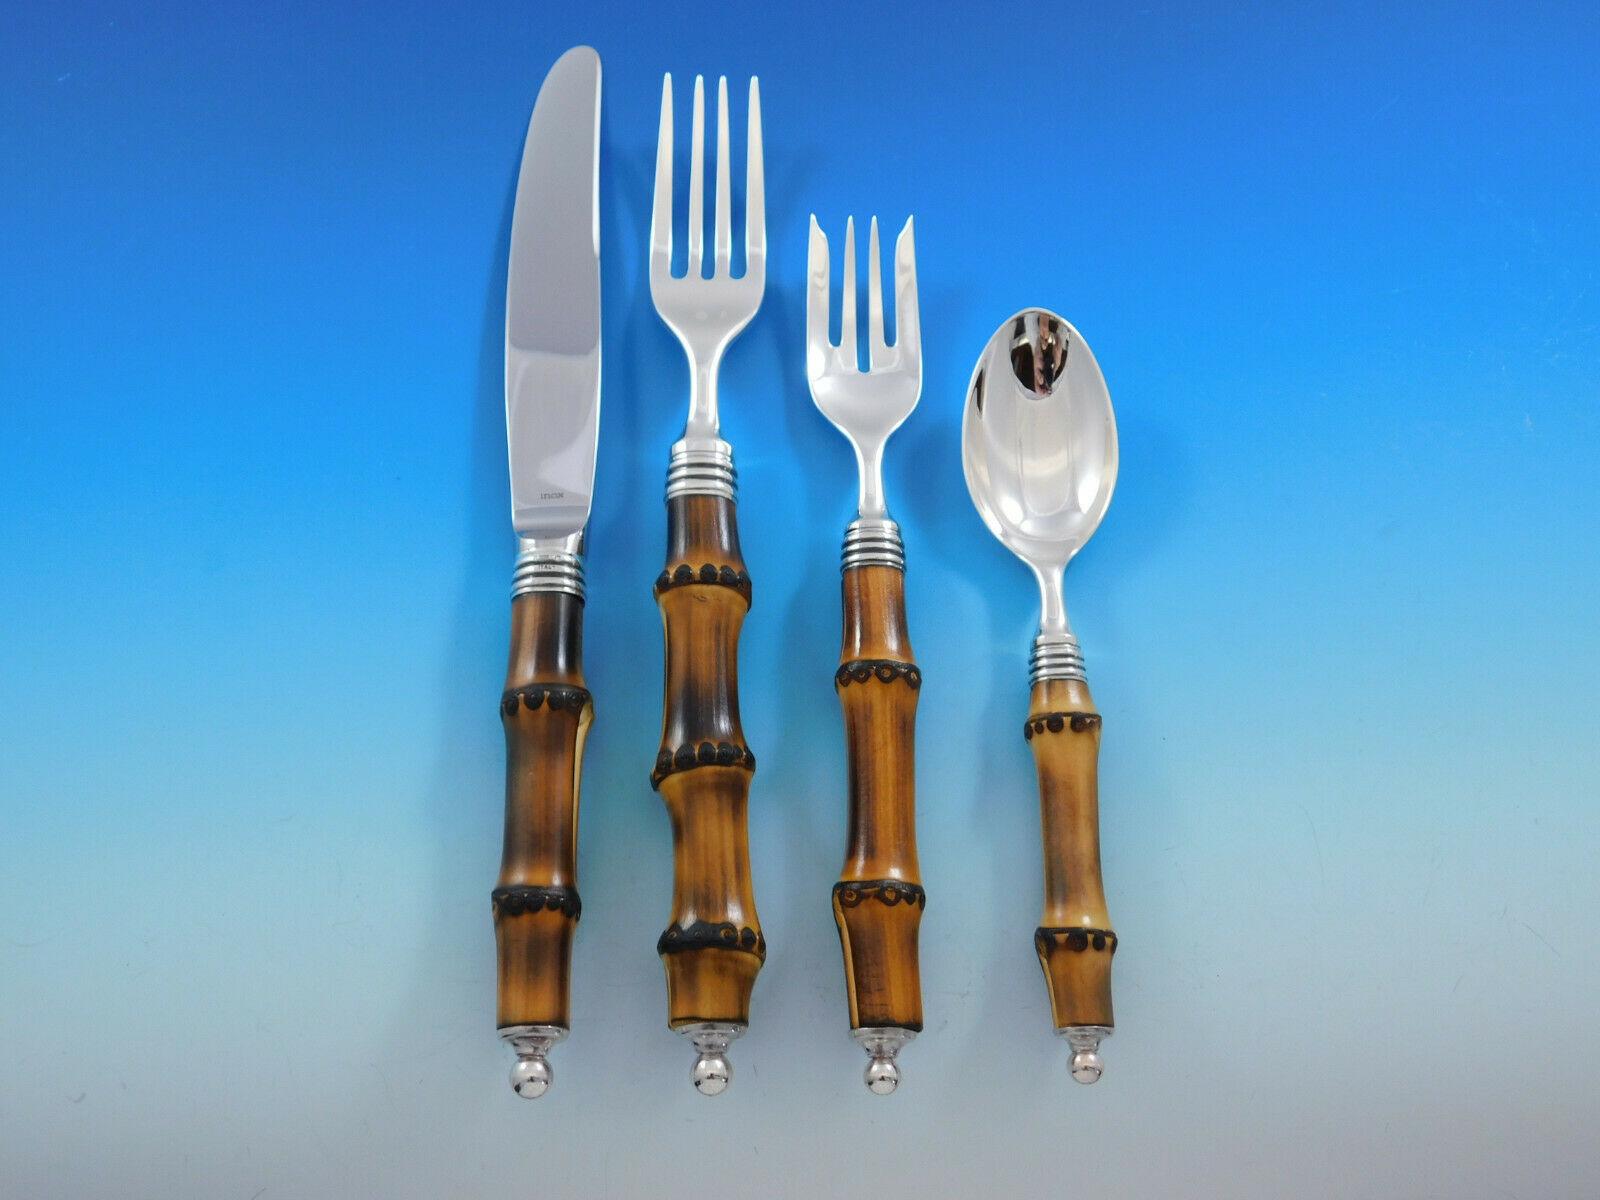 Superb Tahiti by Buccellati Italy sterling silver and bamboo handle flatware set, 63 pieces. This set includes:

12 dinner knives with stainless blades, 9 3/4